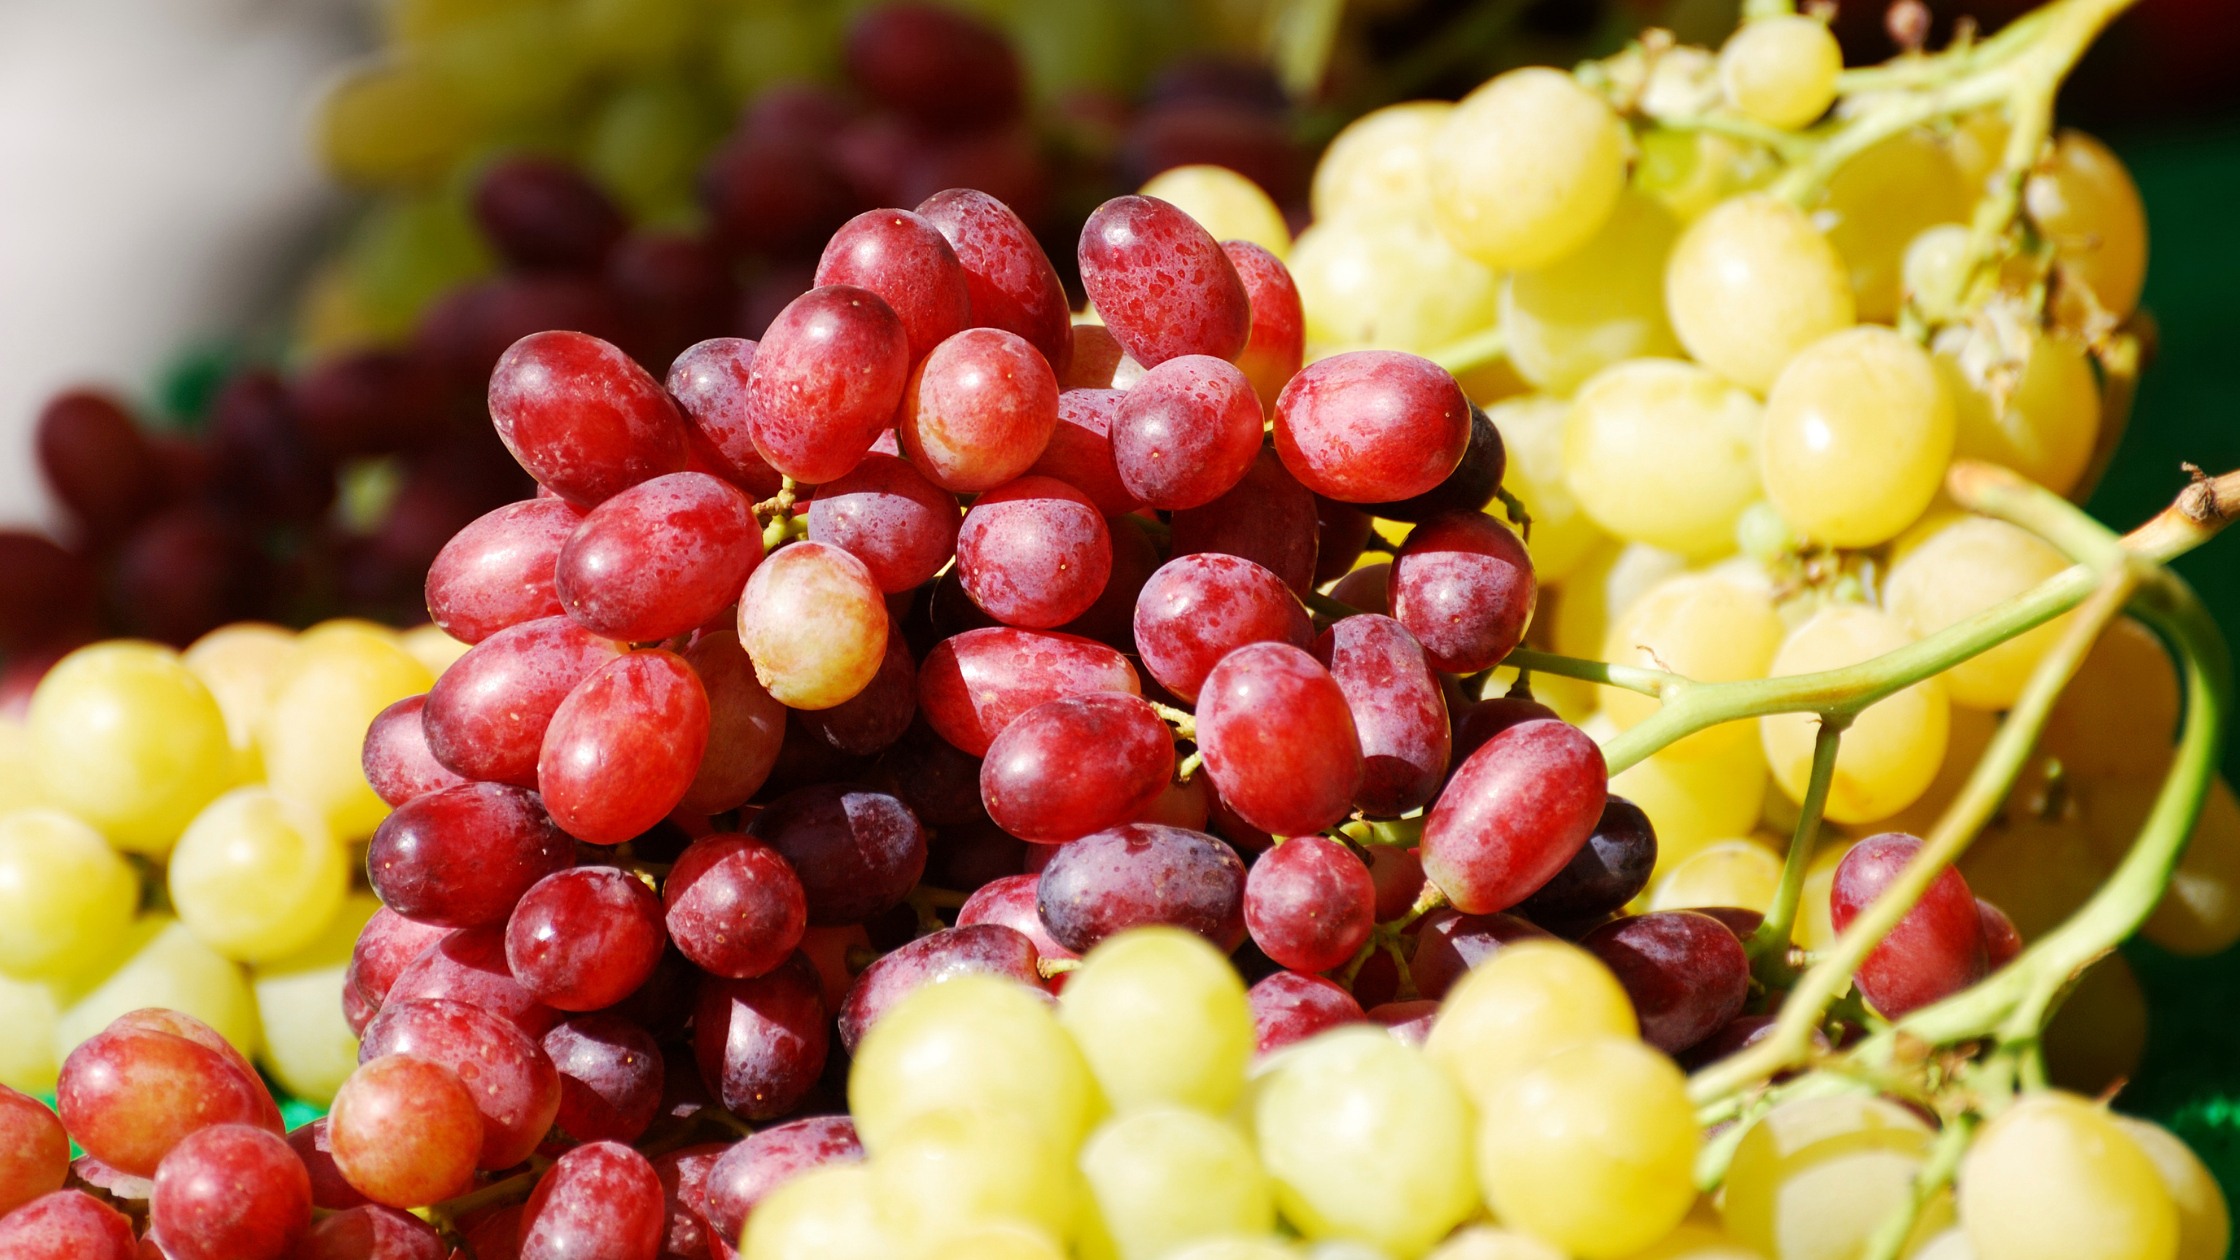 11 Amazing Health Benefits of Consuming Grapes Daily